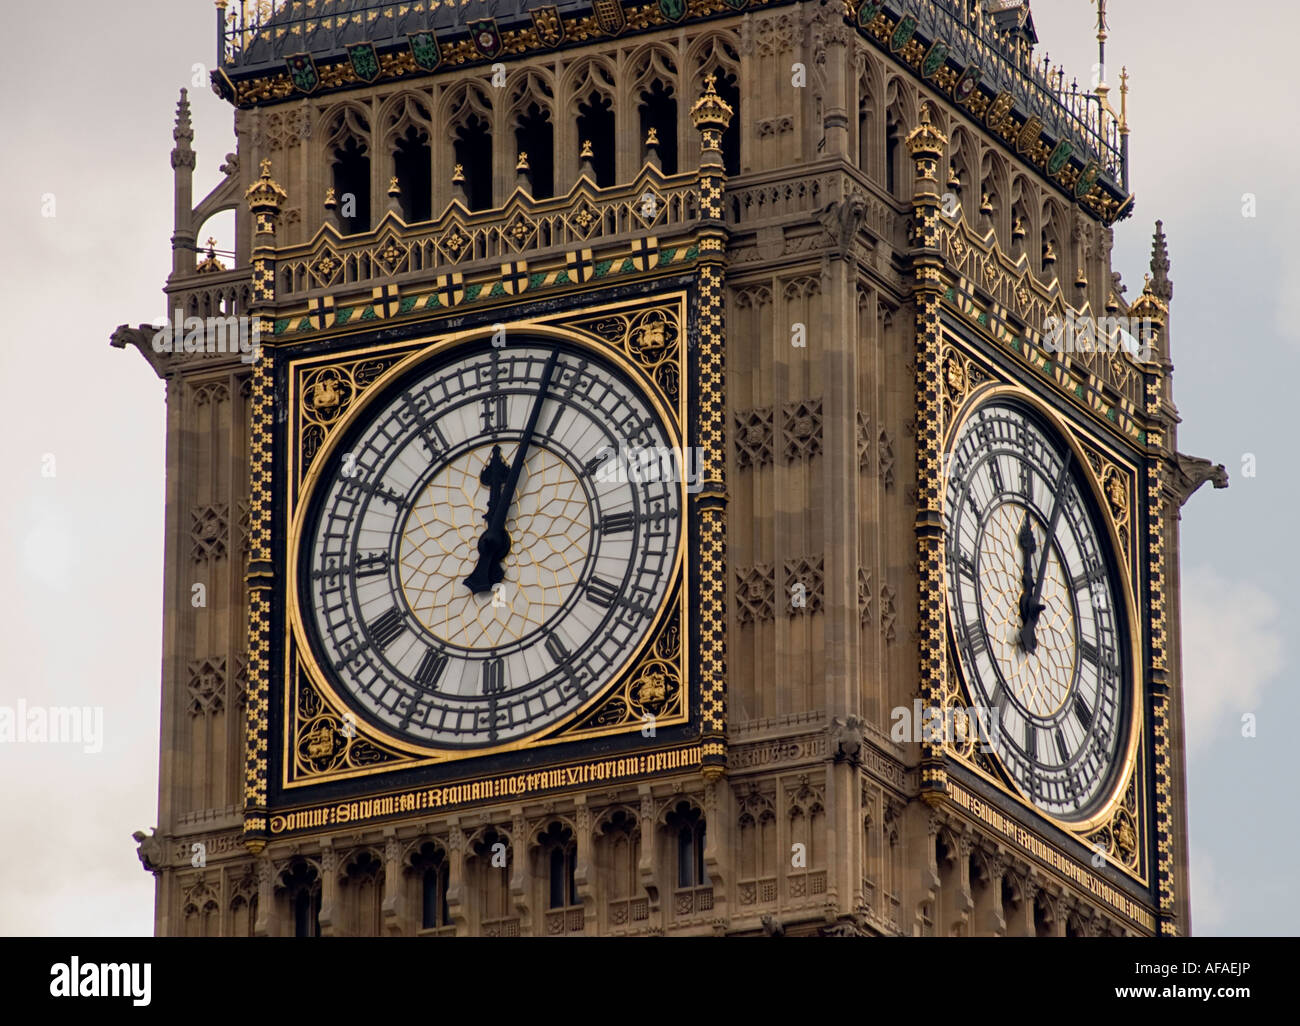 The Clock Tower Housing Big Ben at the House of Parliament, London. Stock Photo